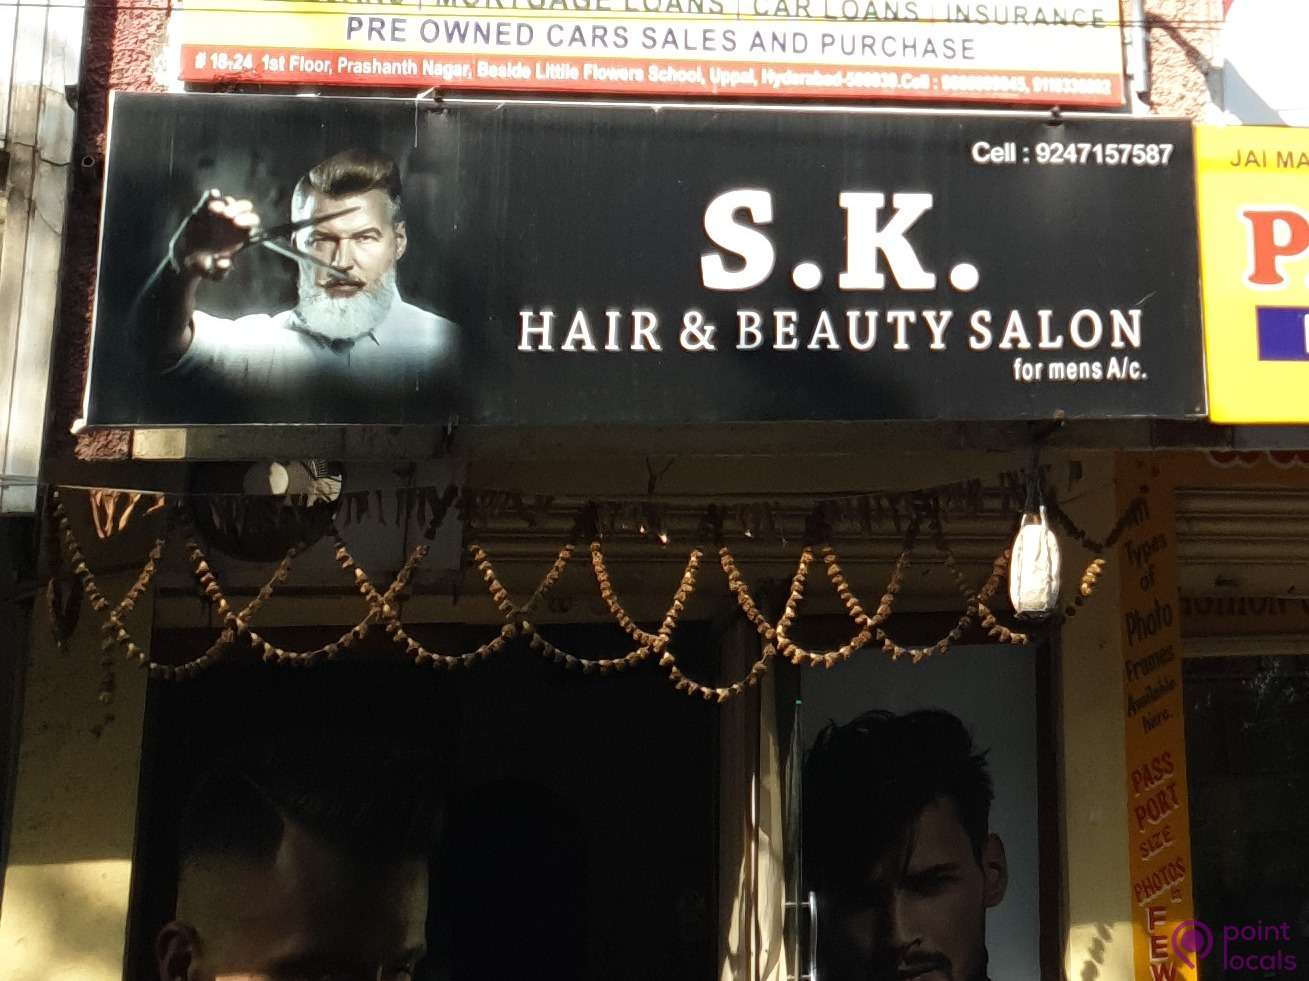 SK Hair And Beauty Salon - Beauty Salon in Hyderabad,Telangana | Pointlocals